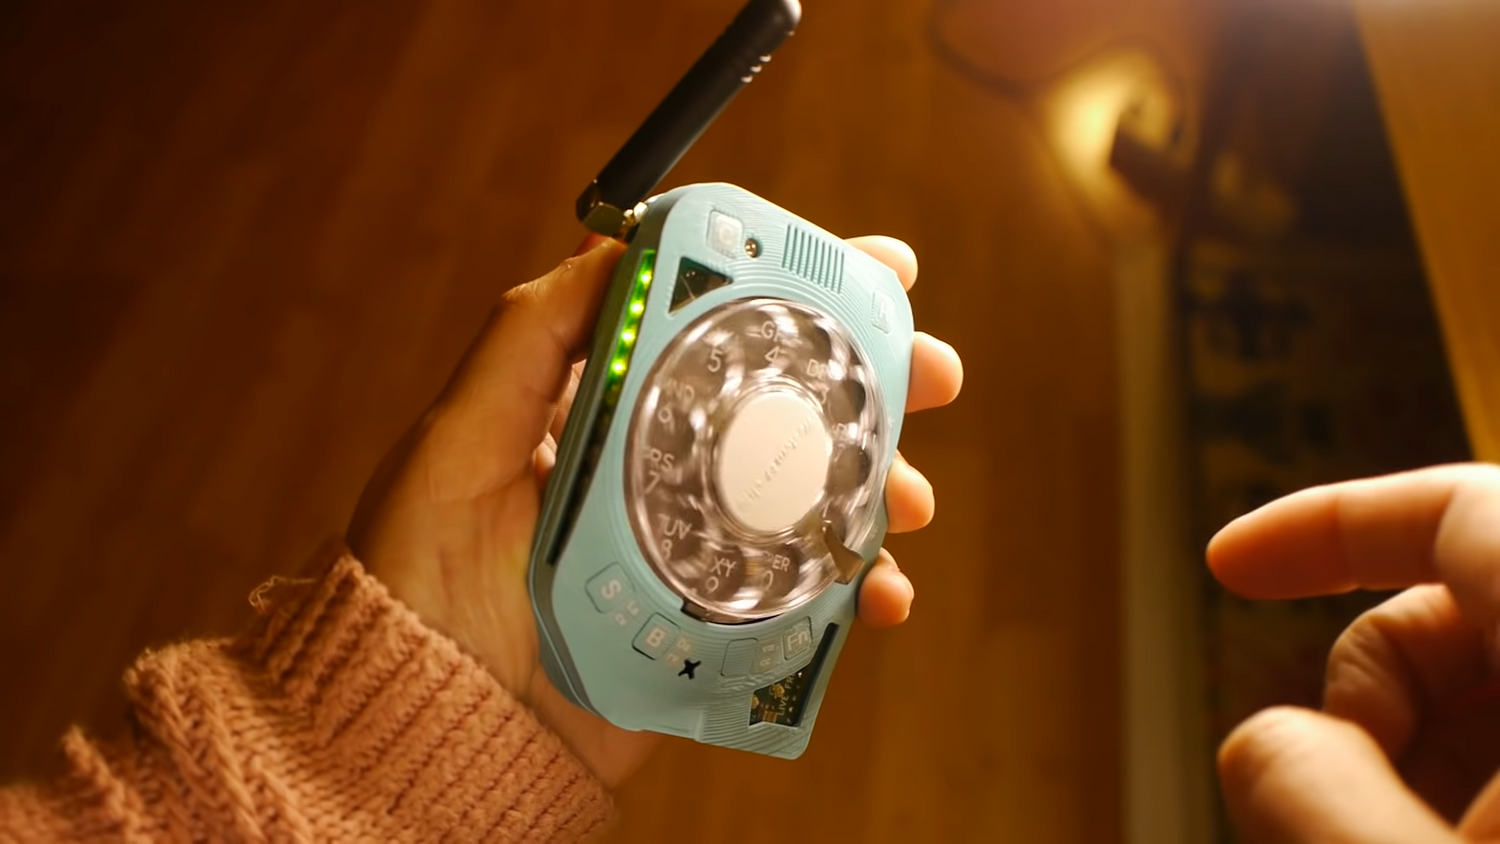 You might be able to buy a 4G rotary cellphone later this year